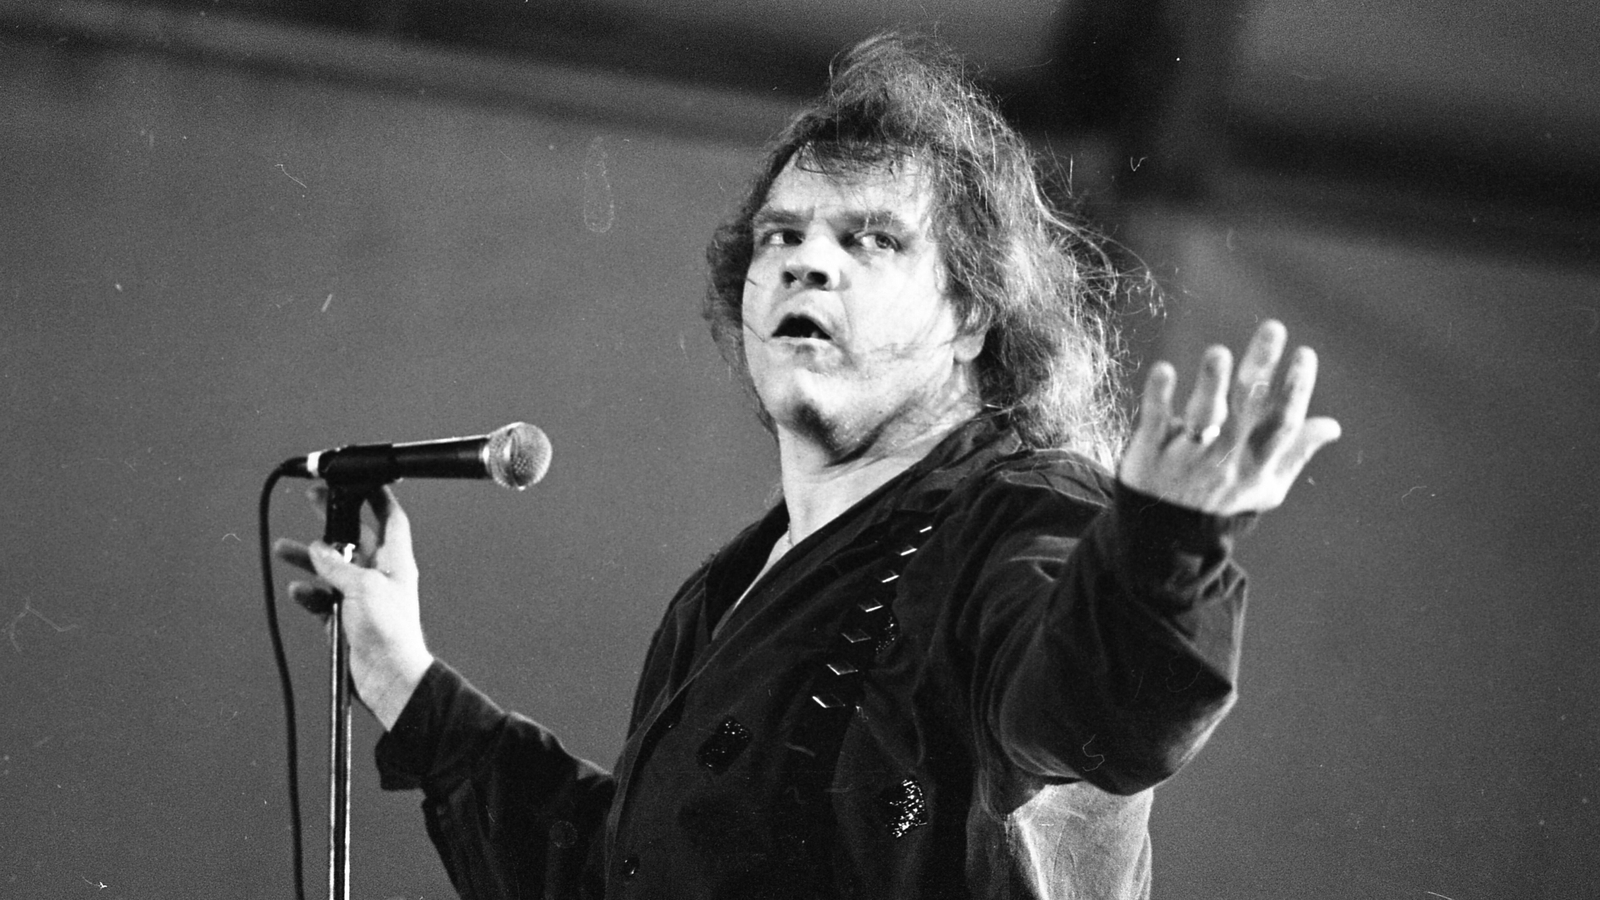 Meat Loaf's hell-raising ride to musical stardom